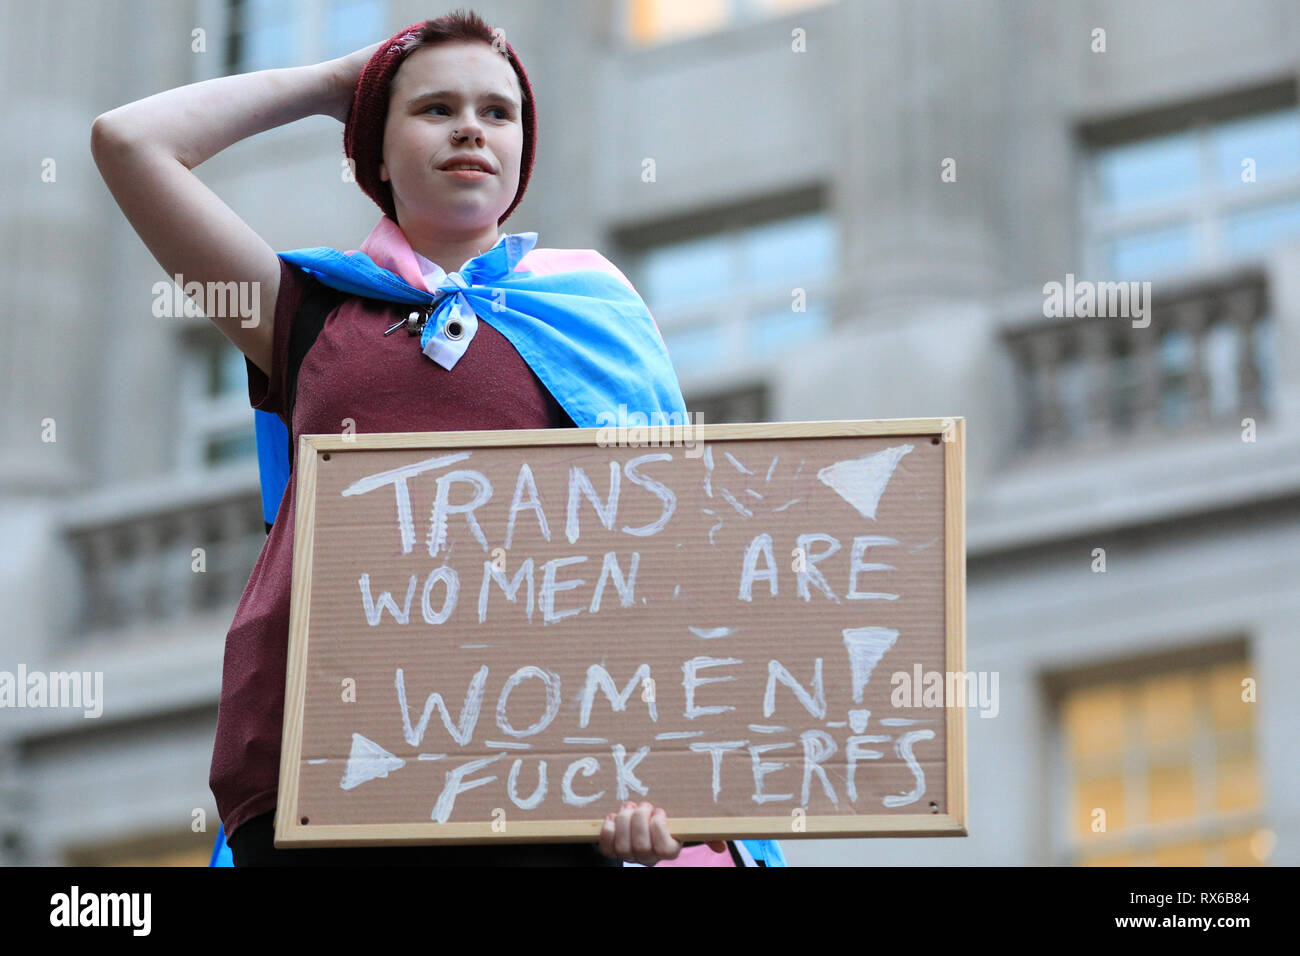 Bank of England, London, UK, 8th Mar 2019. Protesters make their voices heard with placards, banners and loud chants and cheerful shouting. Women from all walks of life join in the Women's Strike to protest for equality, women's rights and end to suppression around the world. Credit: Imageplotter/Alamy Live News Stock Photo